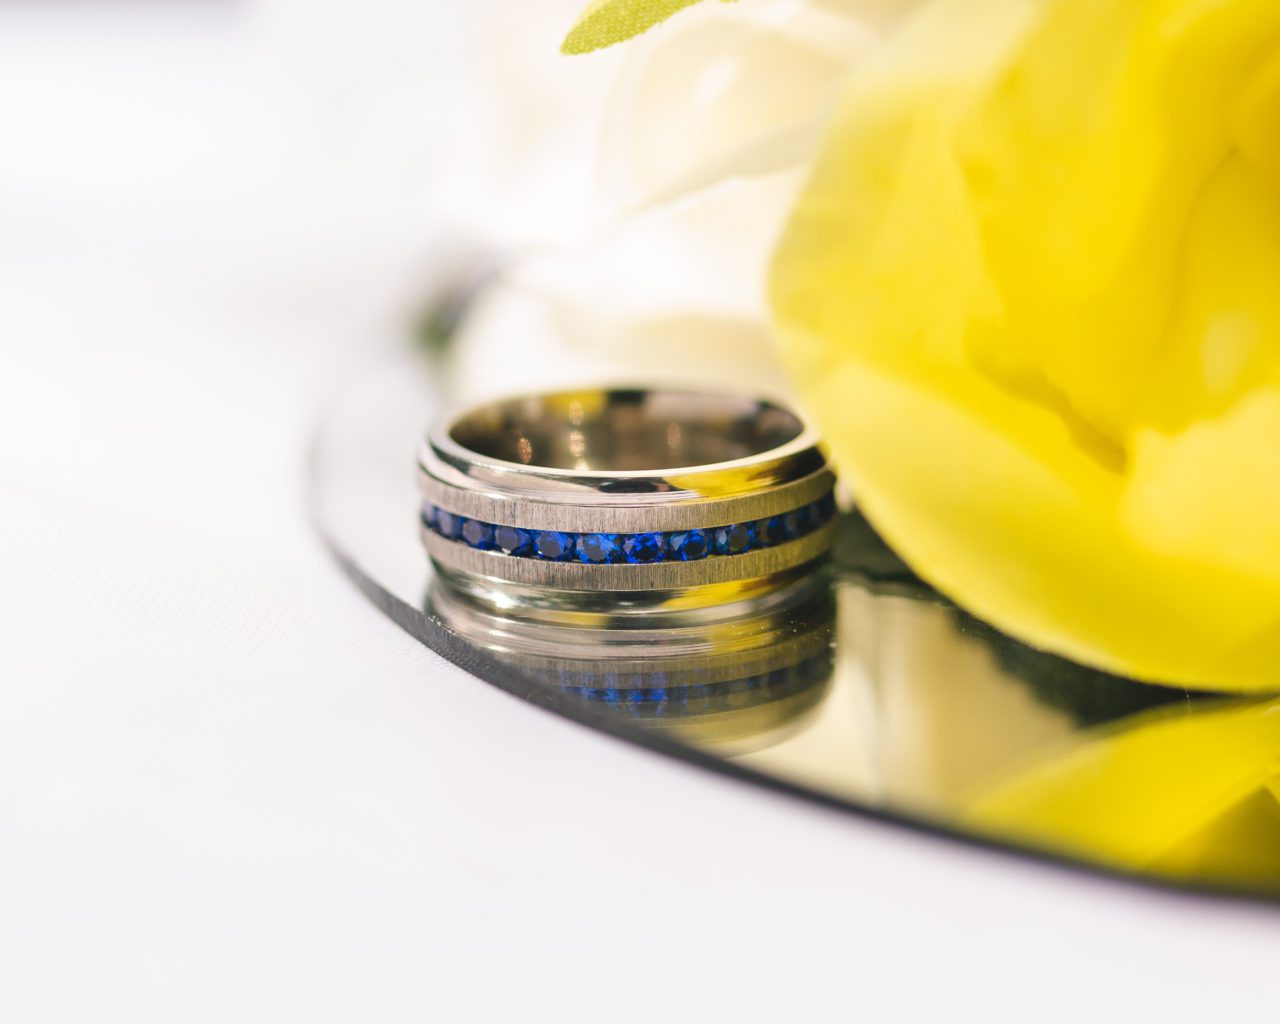 Beautiful wedding ring detail shot with yellow accent in top left of shot taken by Gabriel Evans